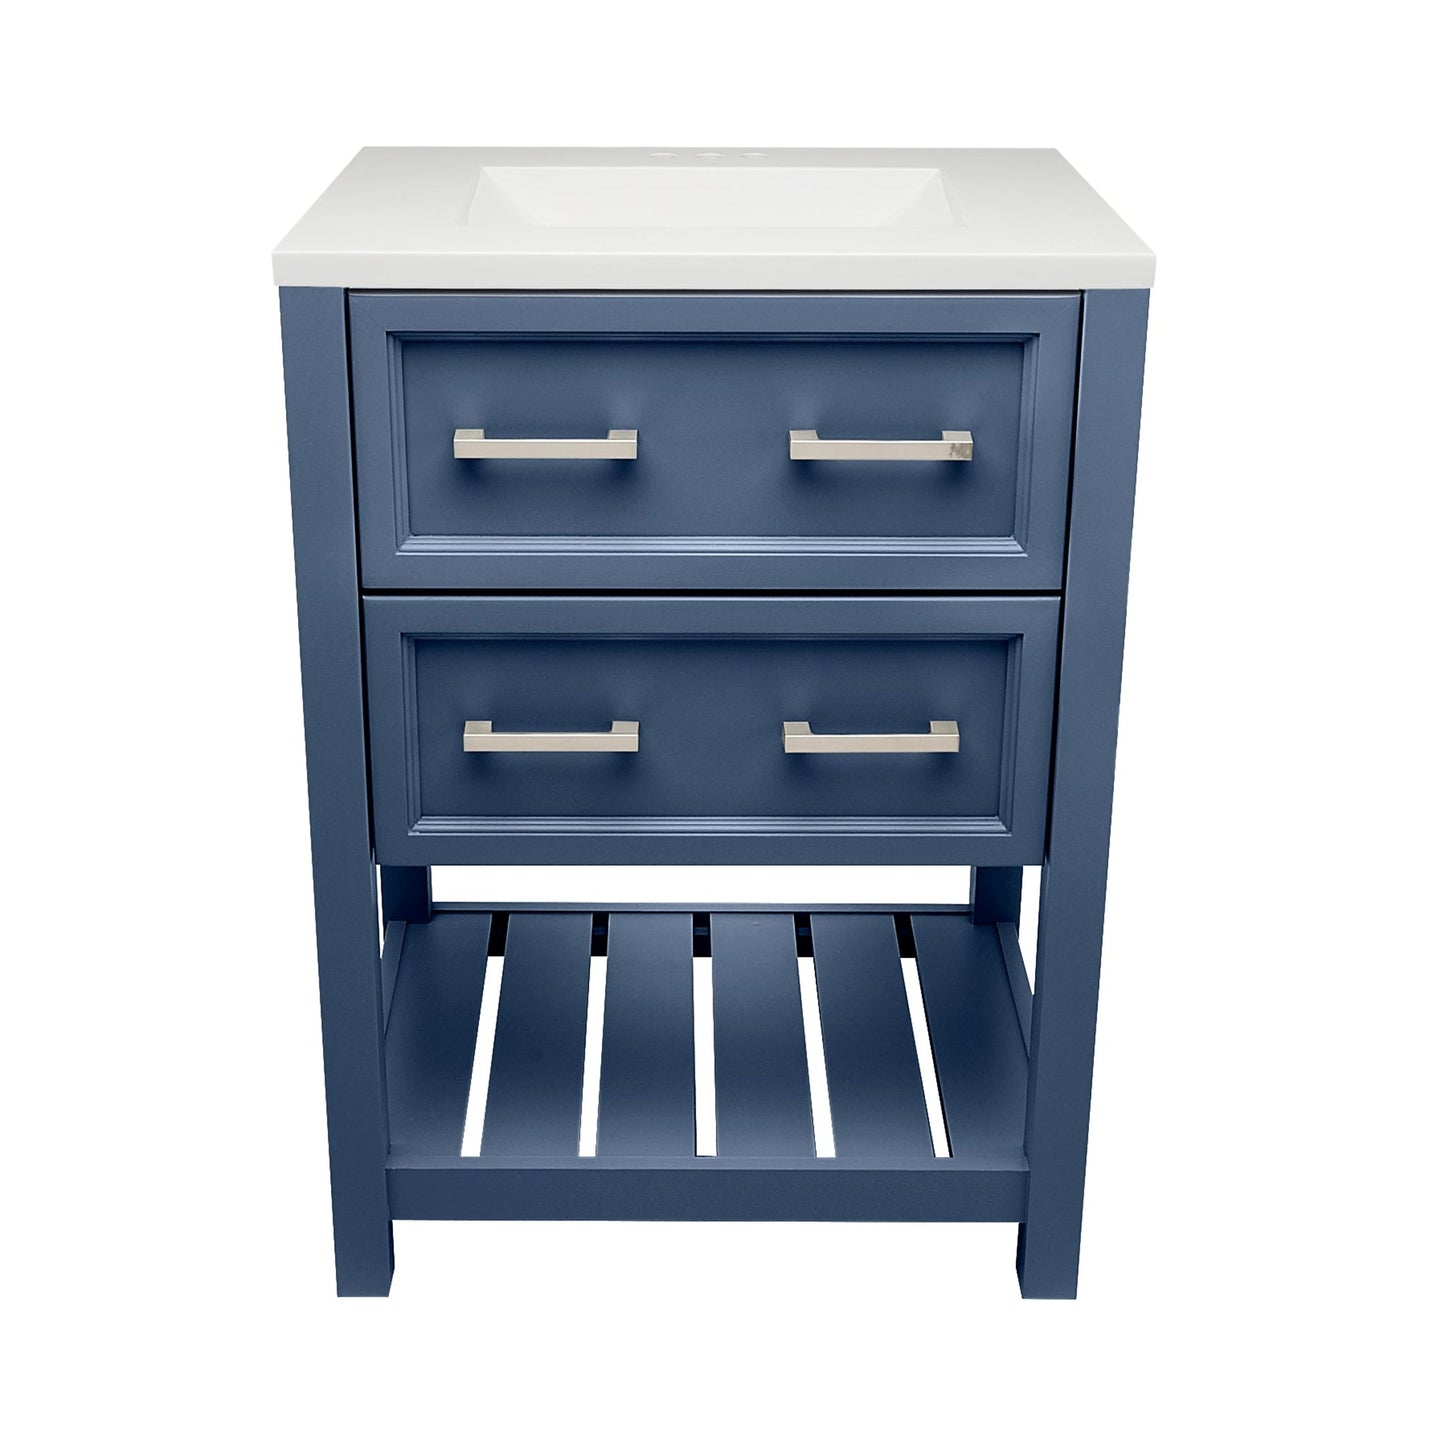 Ella's Bubbles Tremblant 25" Navy Blue Bathroom Vanity With White Cultured Marble Top and Sink